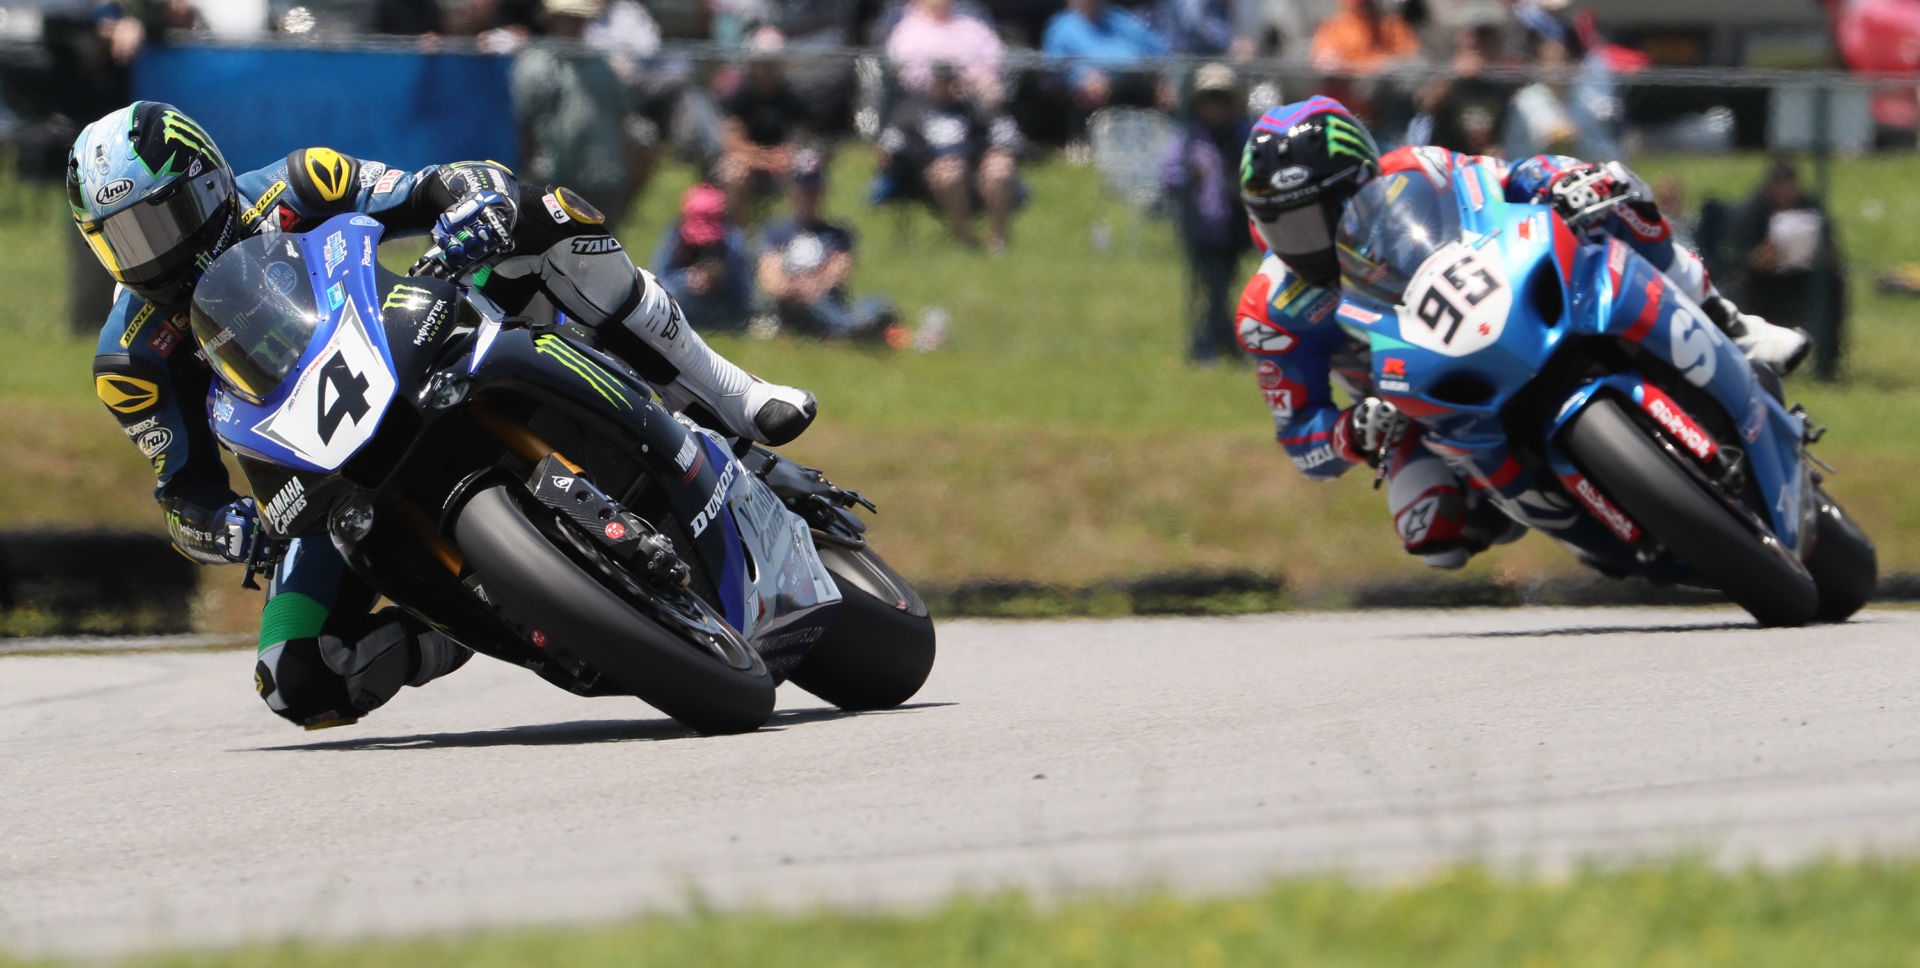 MotoAmerica TV will show all seven years of MotoAmerica's races, like this battle between Josh Hayes (4) and Roger Hayden (95) at VIR in 2016. Photo by Brian J. Nelson.